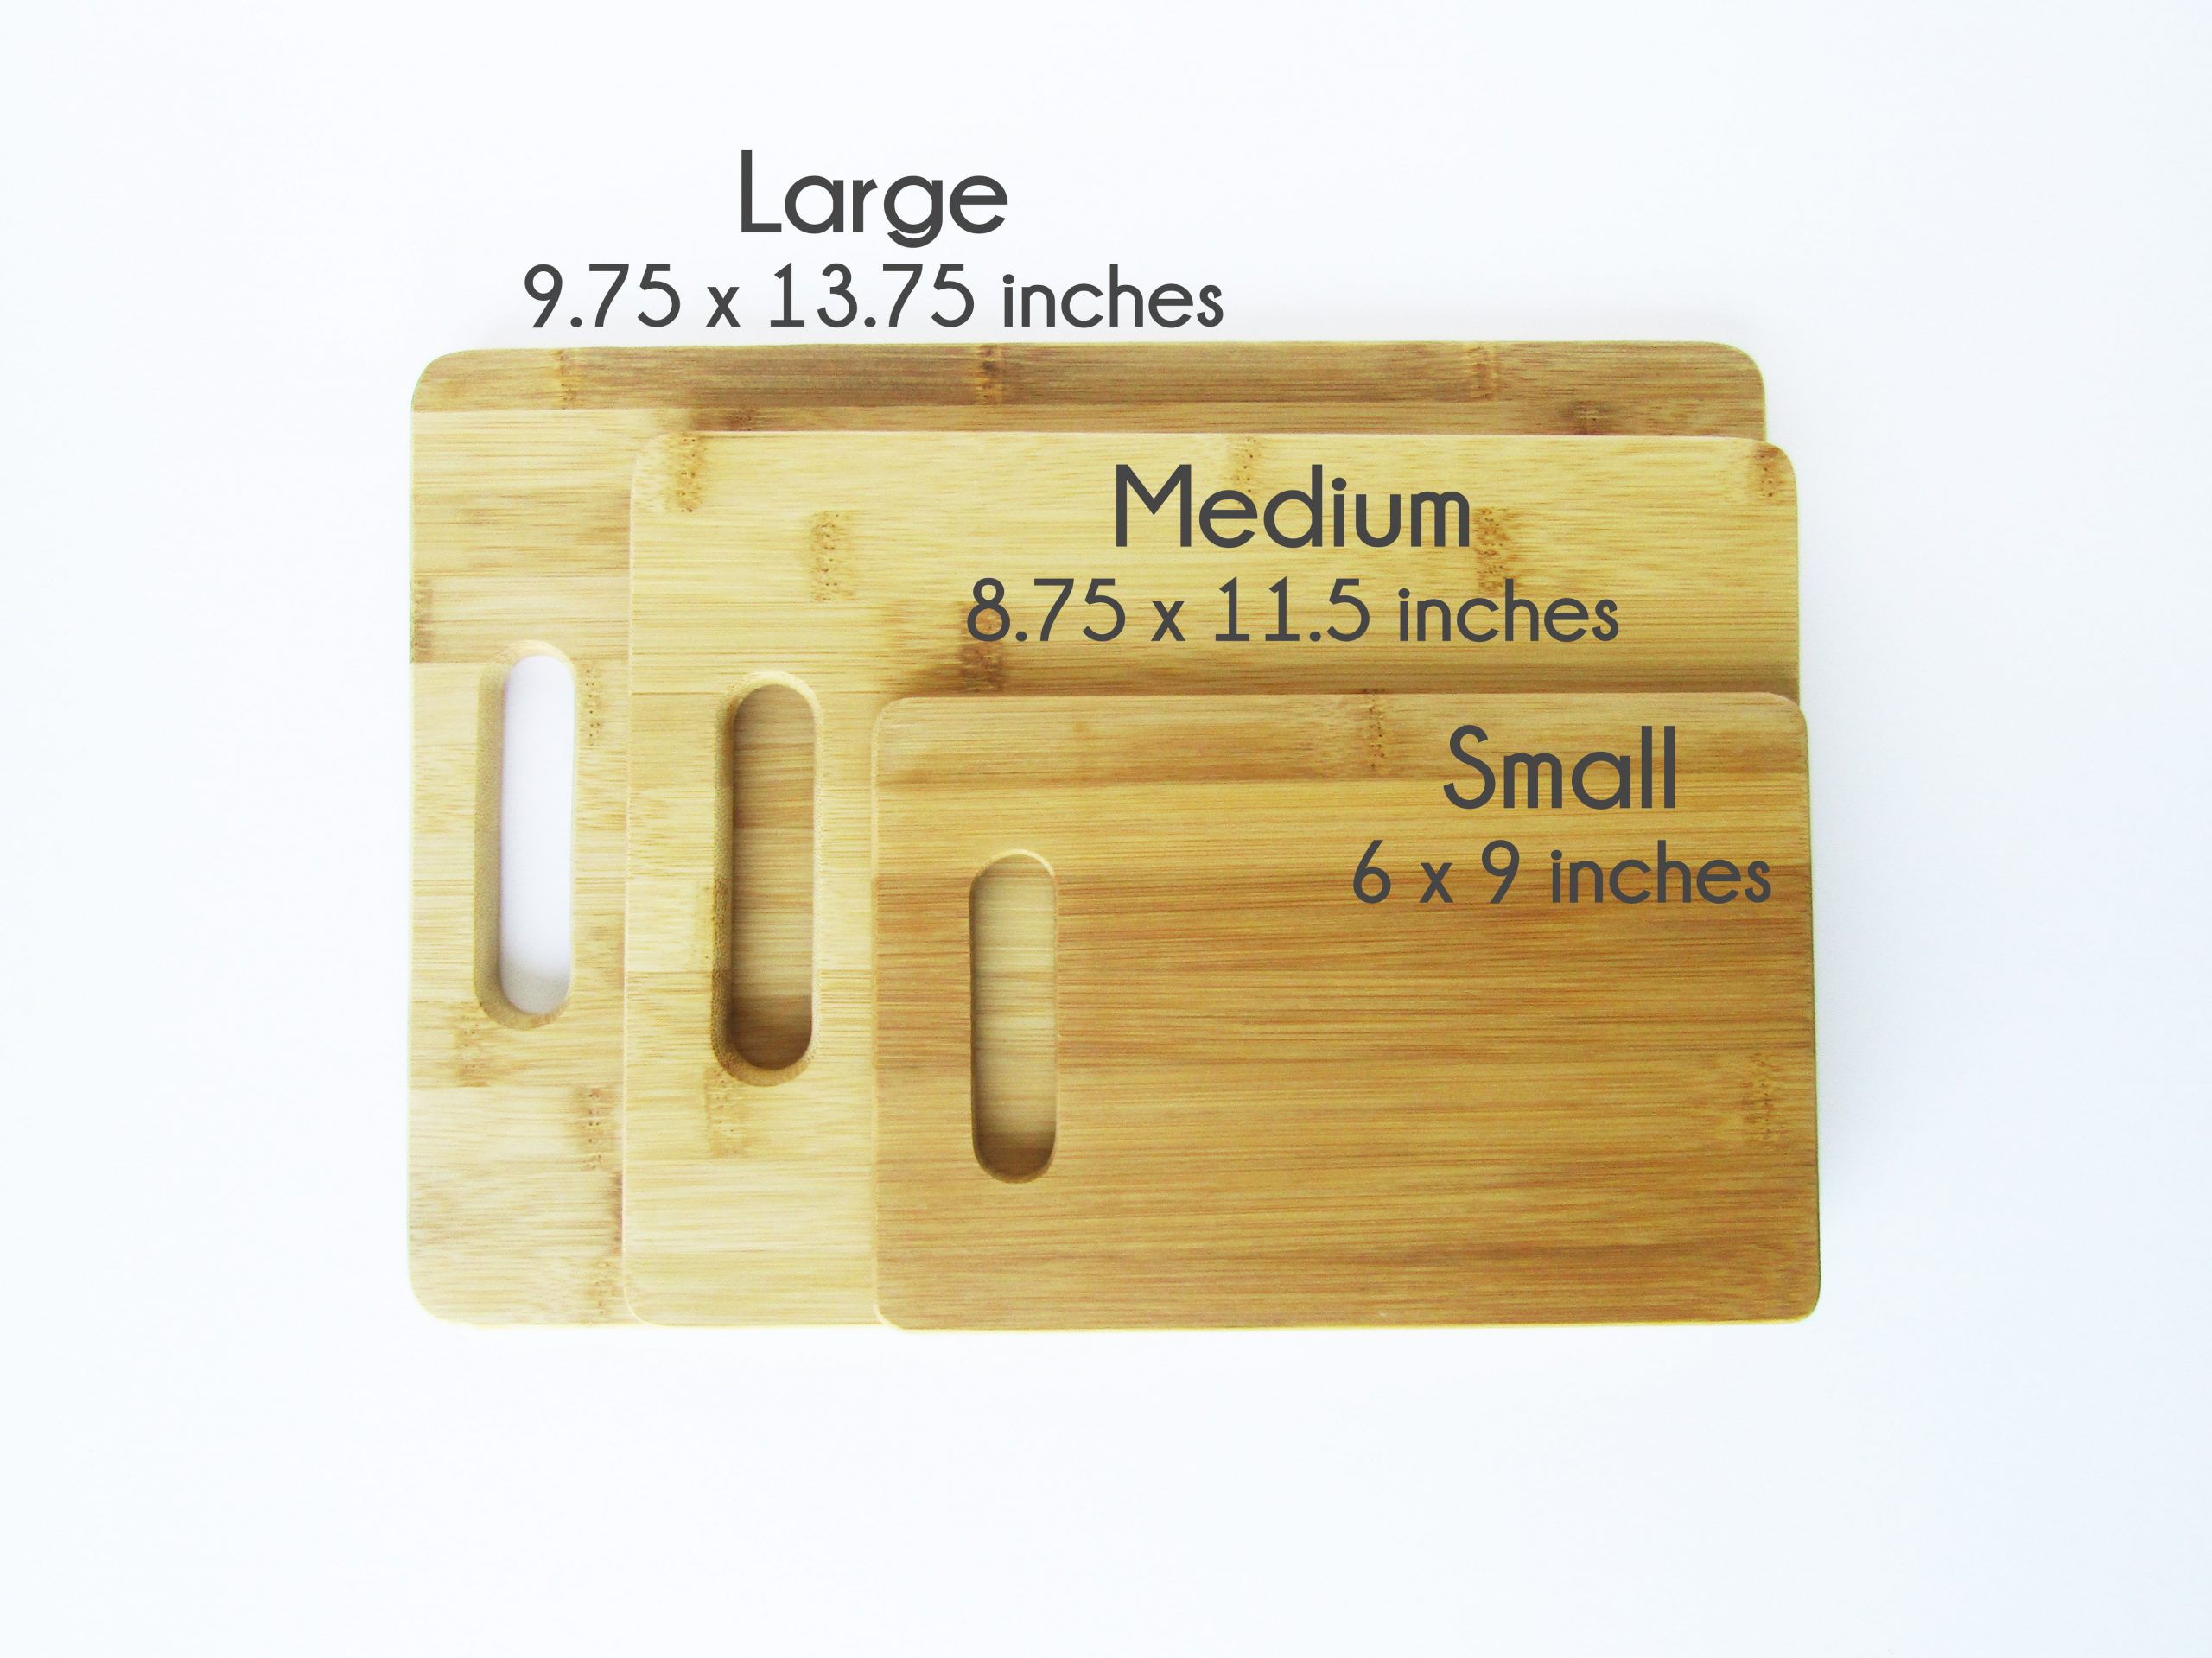 https://julssweetdesigns.com/wp-content/uploads/2020/09/3-Cutting-Board-Handles-Stock-1-Sizes-scaled.jpg